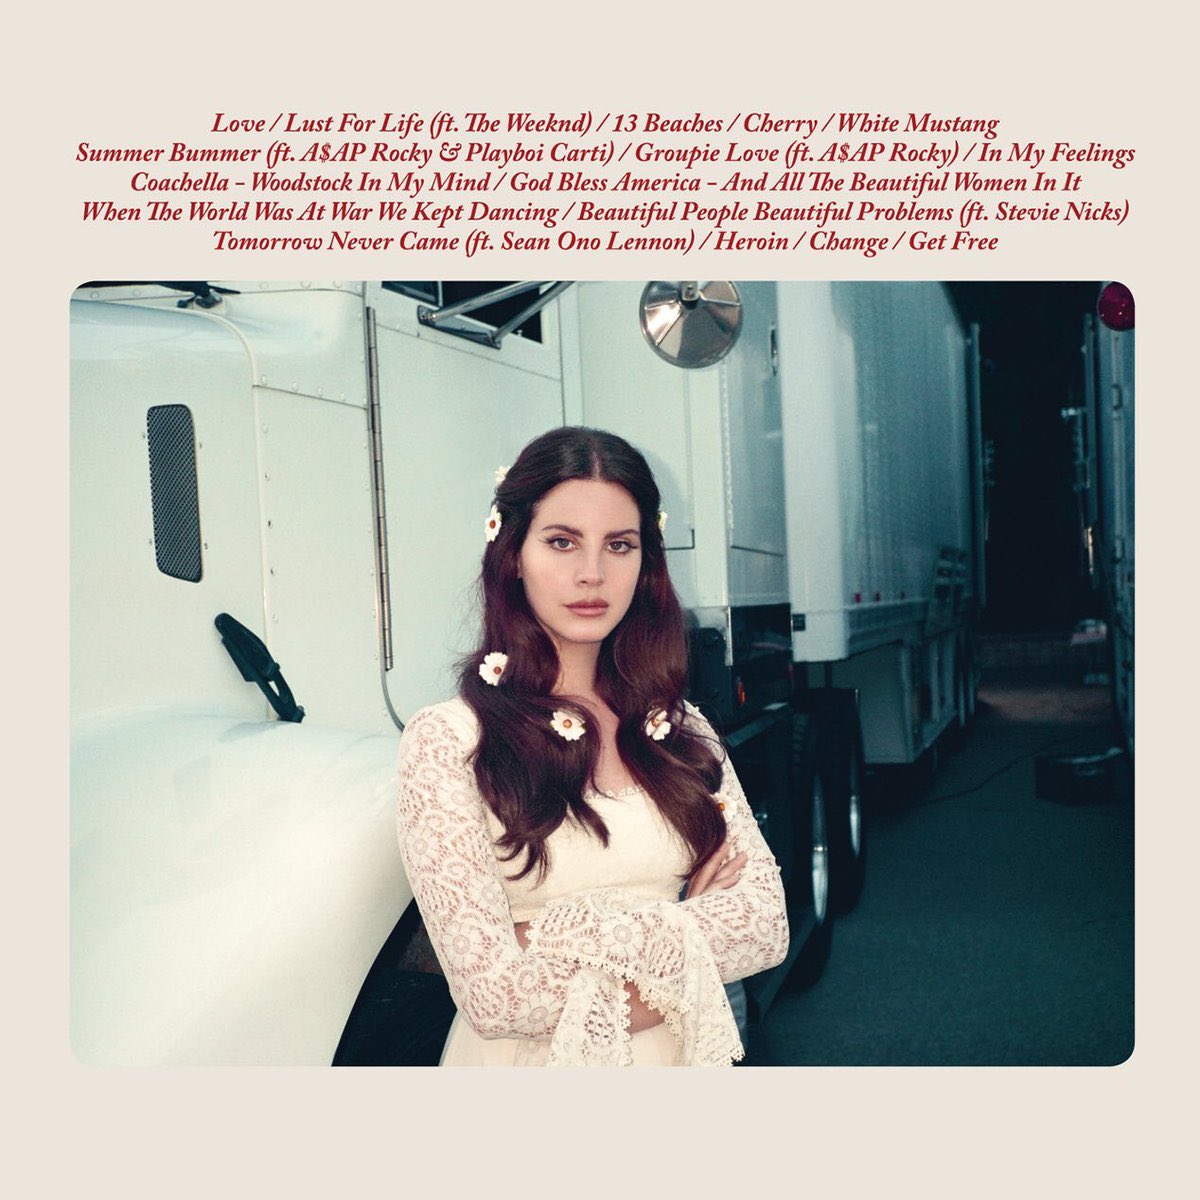 top 3 from lust for life by lana del rey